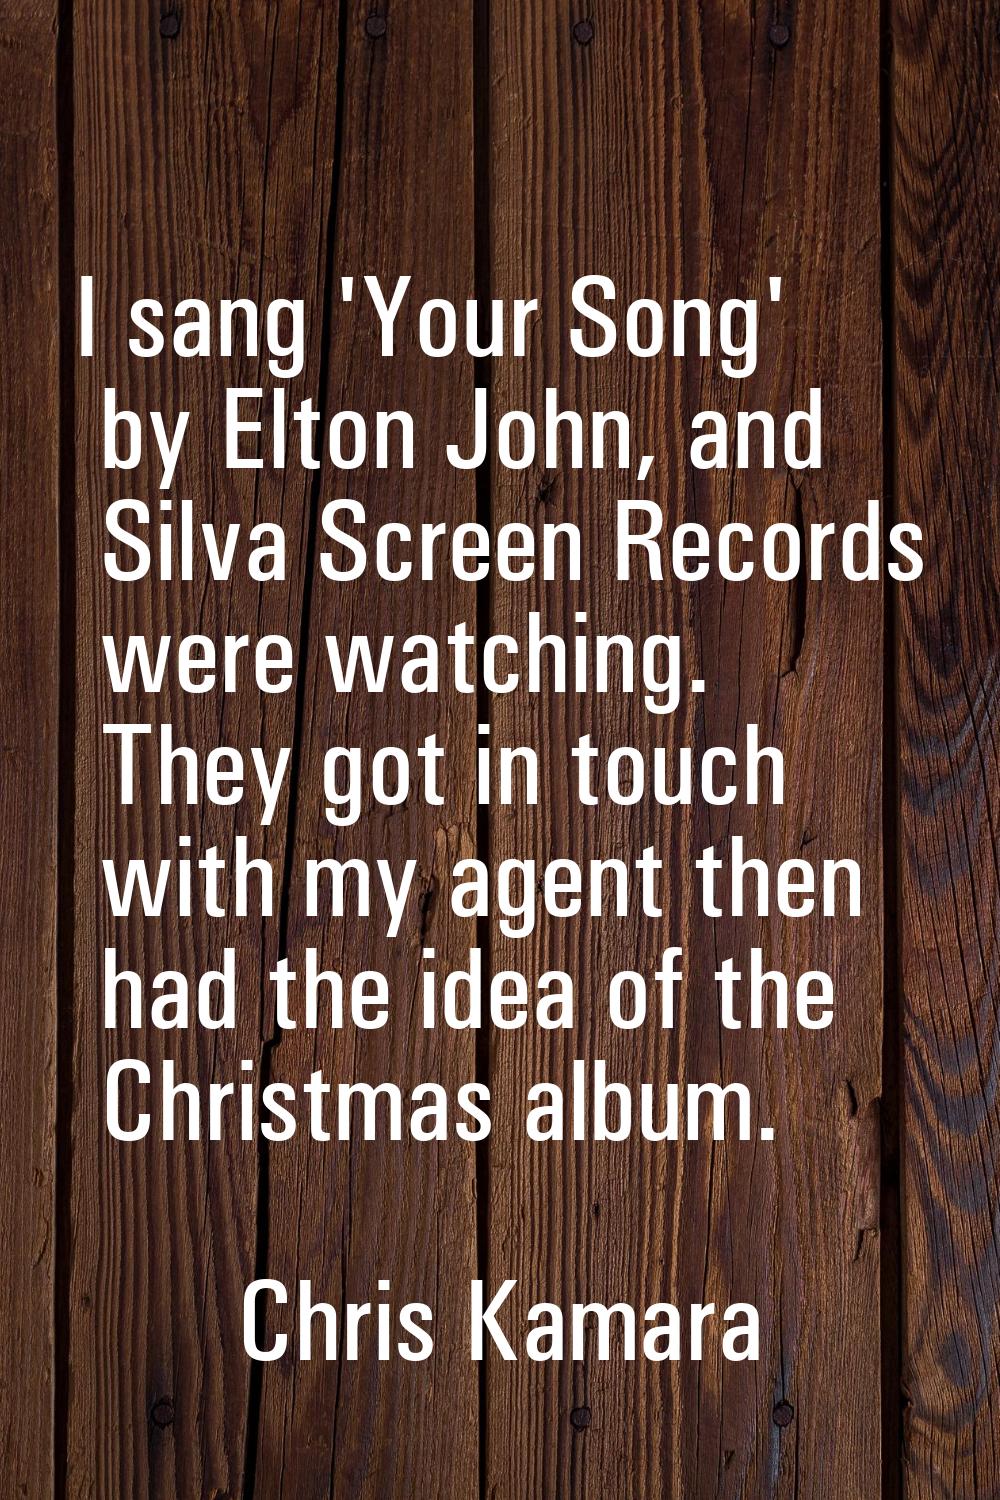 I sang 'Your Song' by Elton John, and Silva Screen Records were watching. They got in touch with my